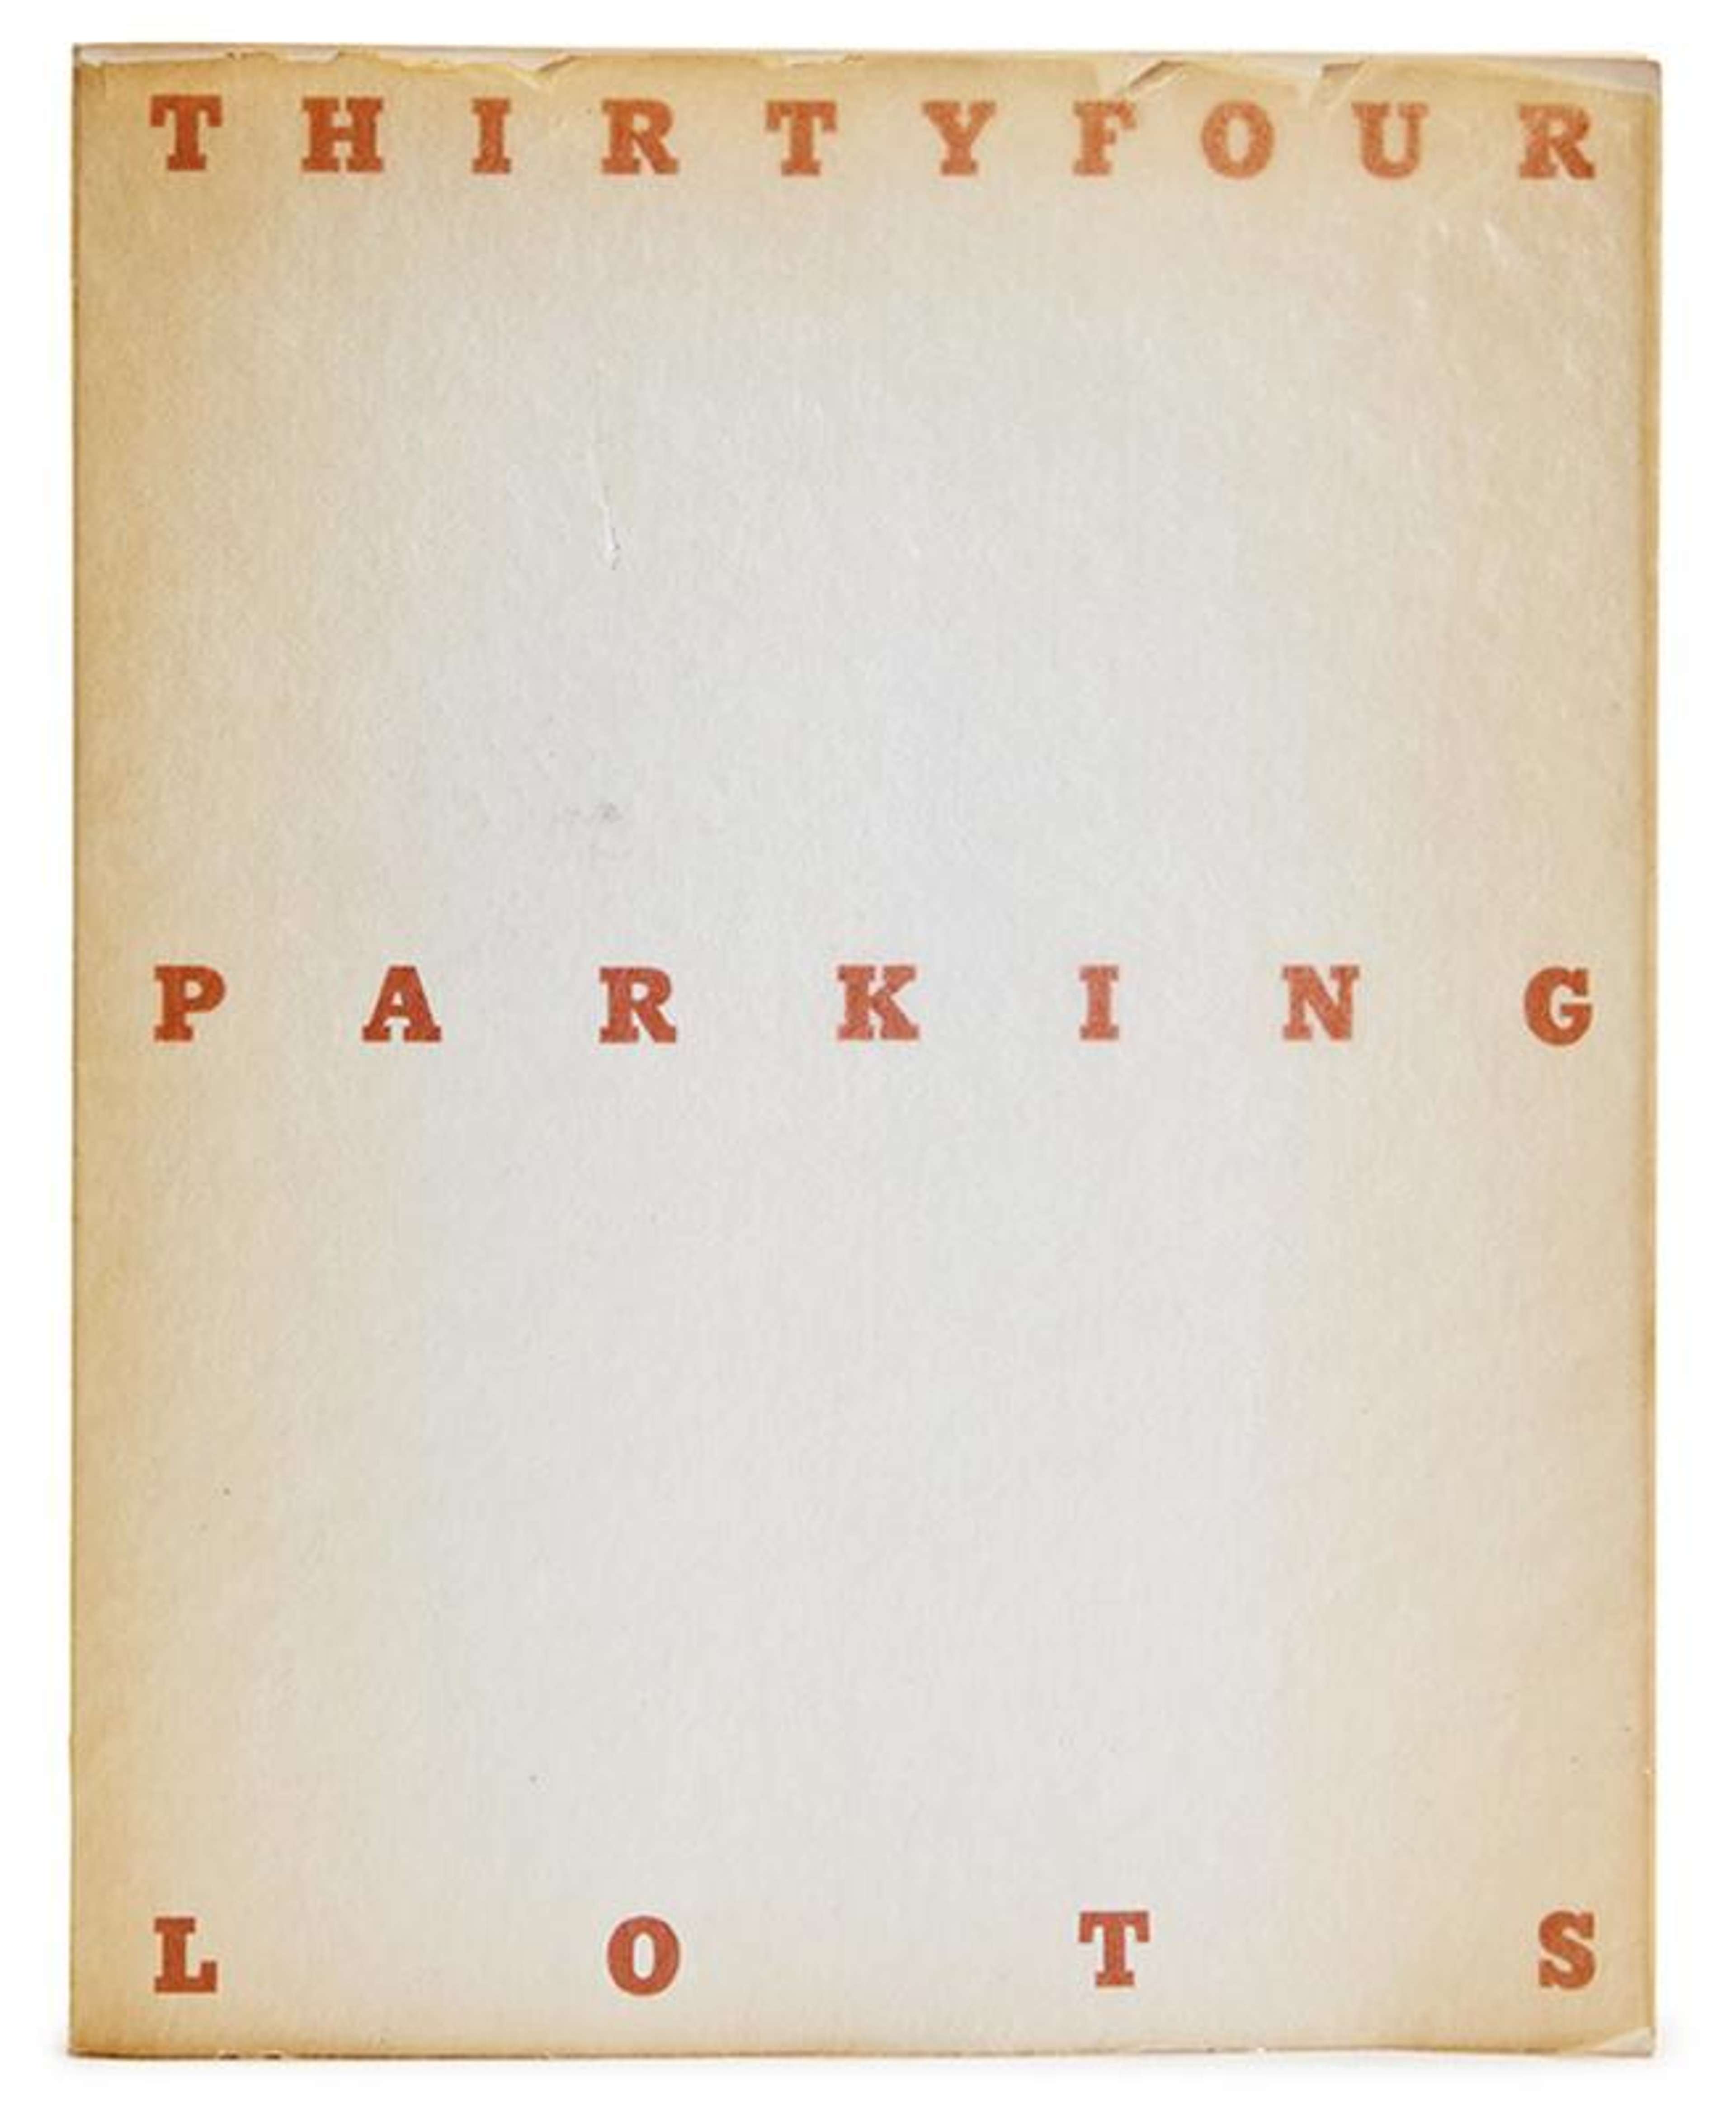 Thirtyfour Parking Lots In Los Angeles - Unsigned Print by Ed Ruscha 1967 - MyArtBroker